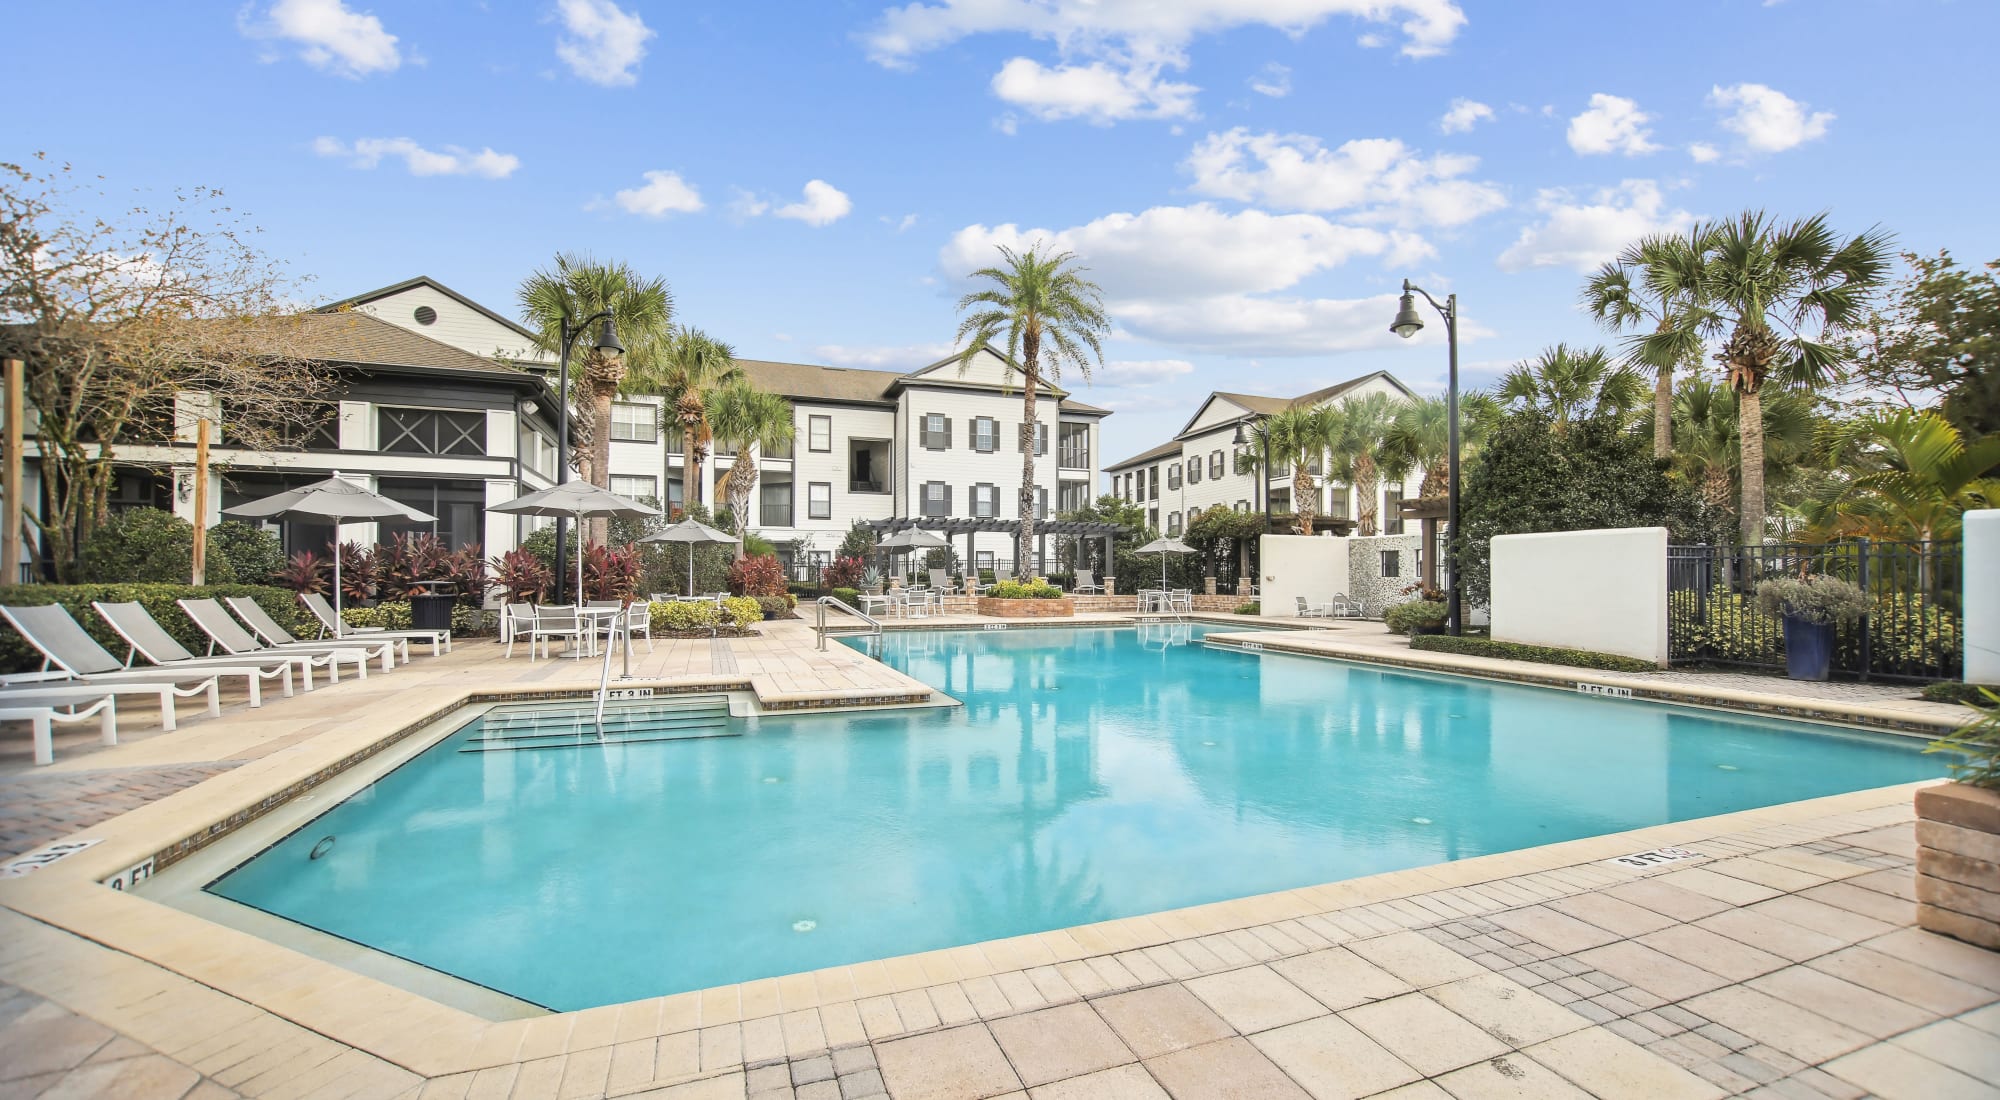 Amenities at Heritage on Millenia Apartments in Orlando, Florida